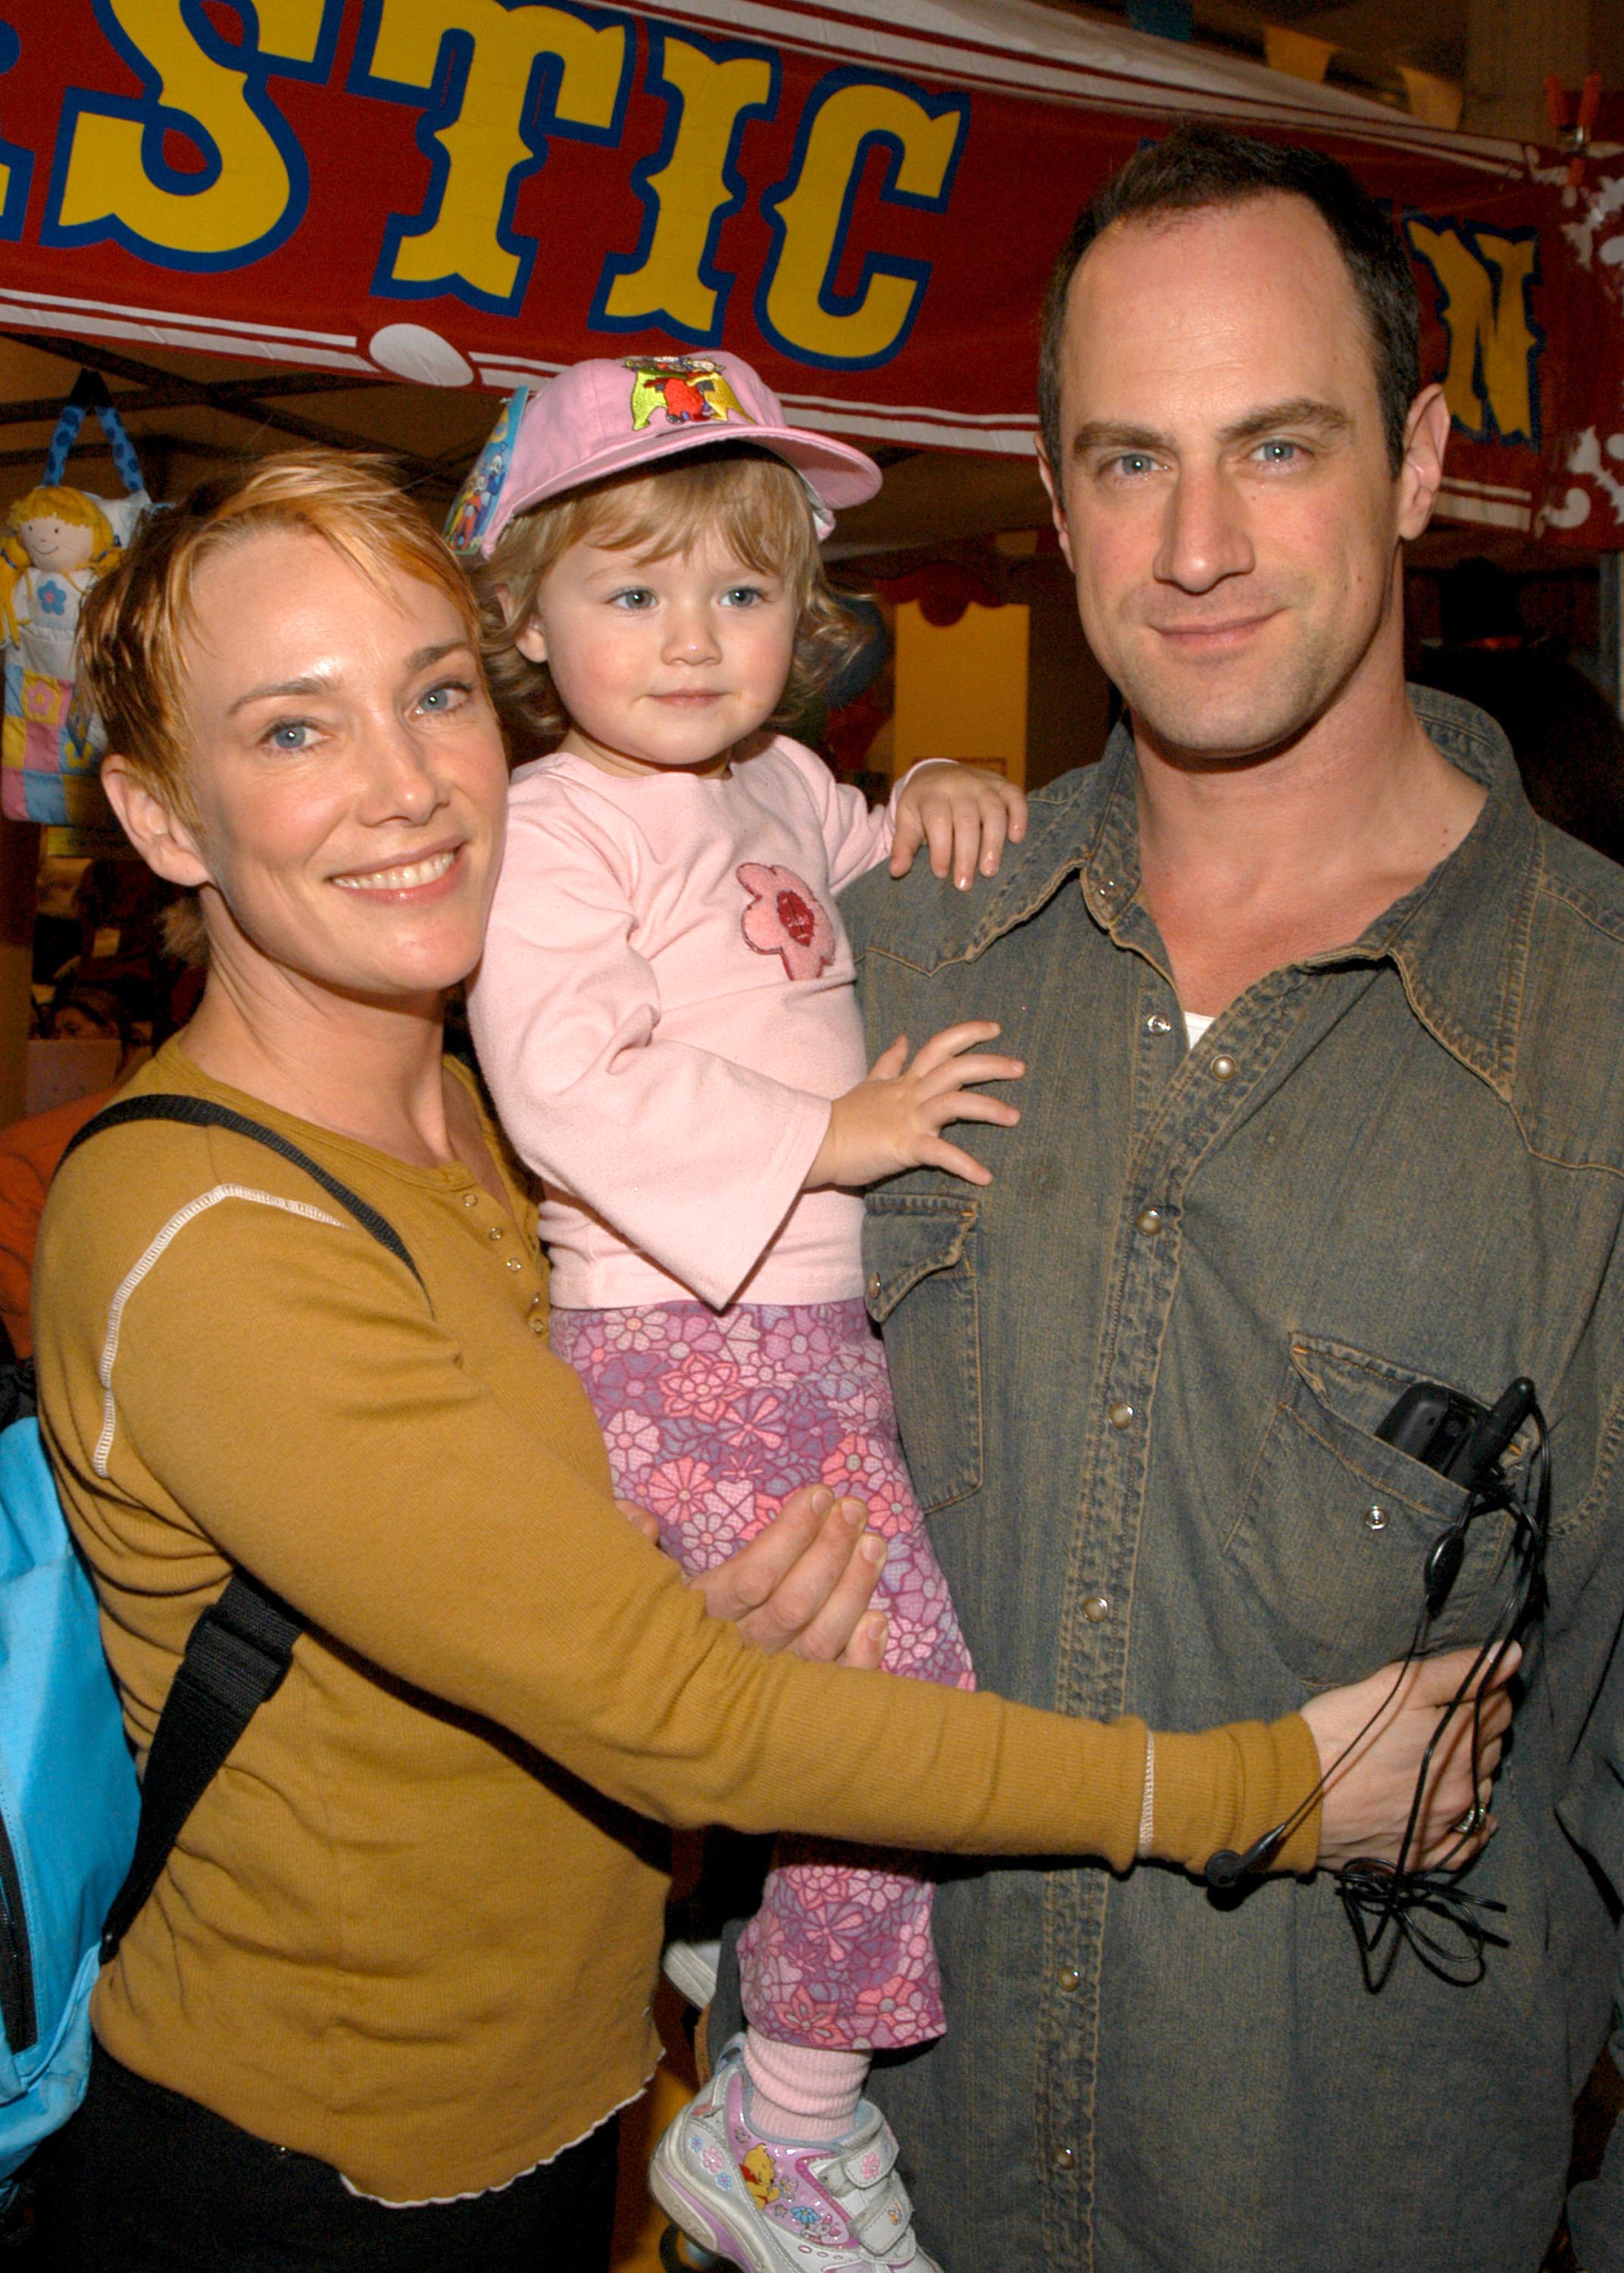 Chris Meloni, Sherman Williams, and their daughter Sophia Meoloni at Children's Day Artrageous Hosted by the Edwin Gould Foundation on April 5, 2003. | Source: Stephen Lovekin/FilmMagic/Getty Images